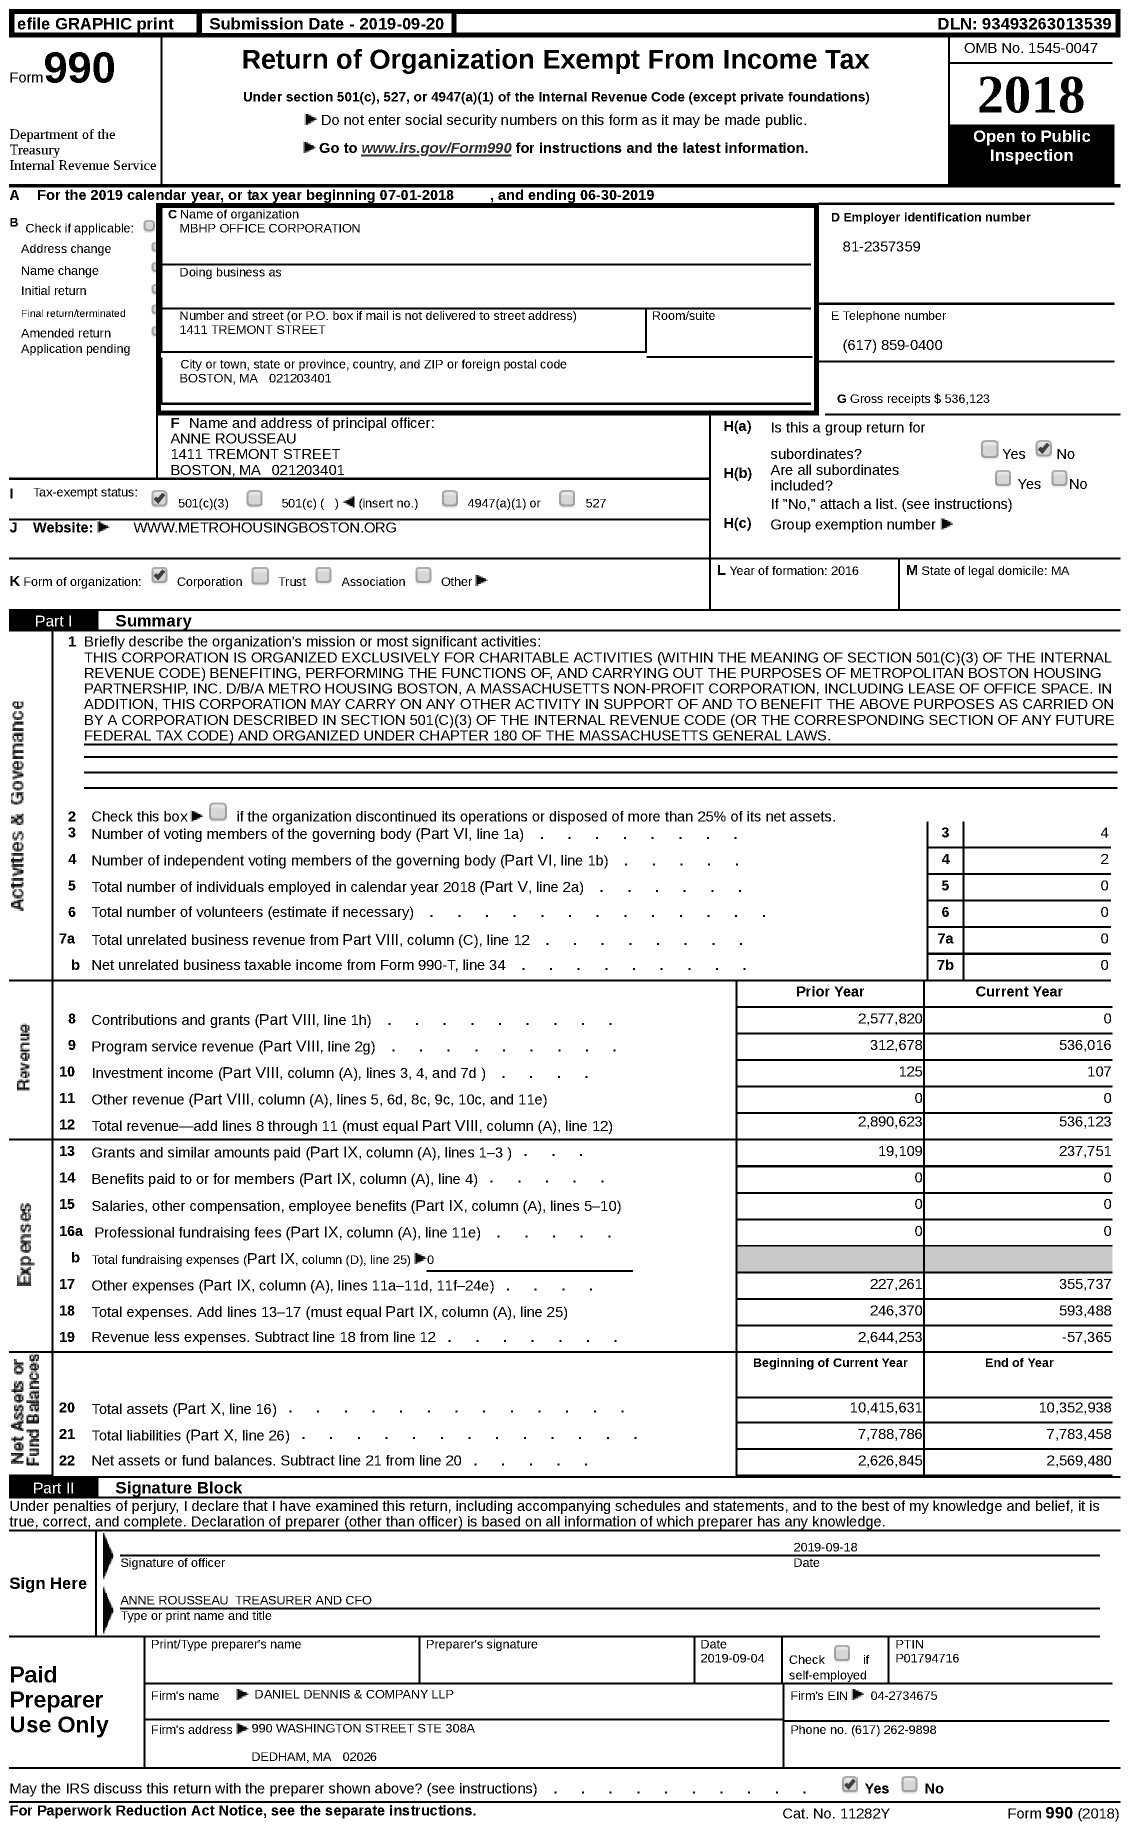 Image of first page of 2018 Form 990 for MBHP Office Corporation